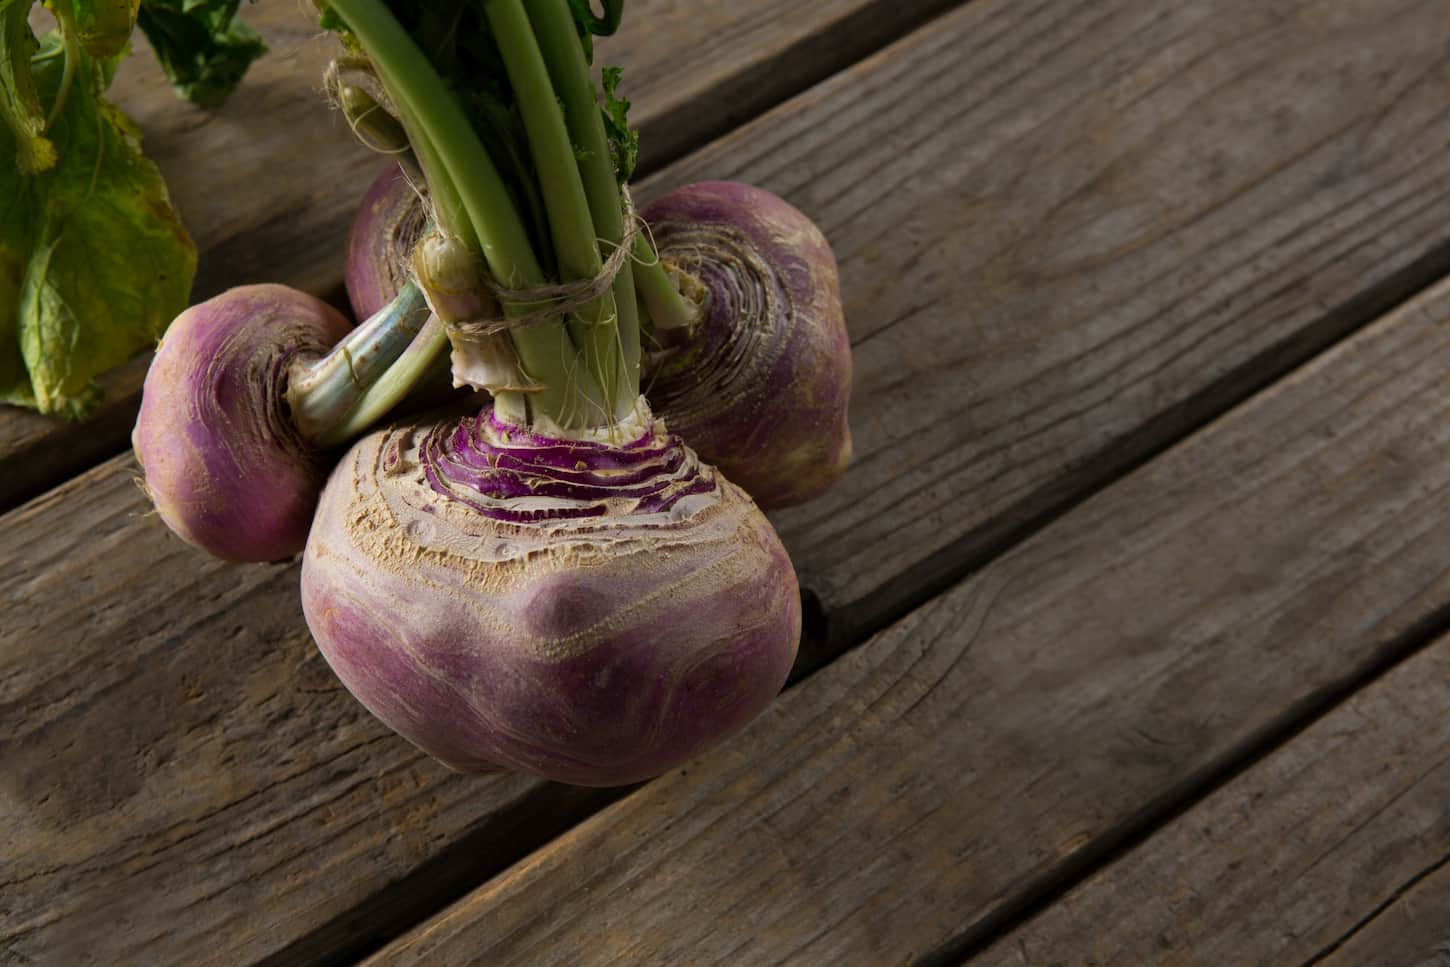 An image of bundled turnips on a wooden table.